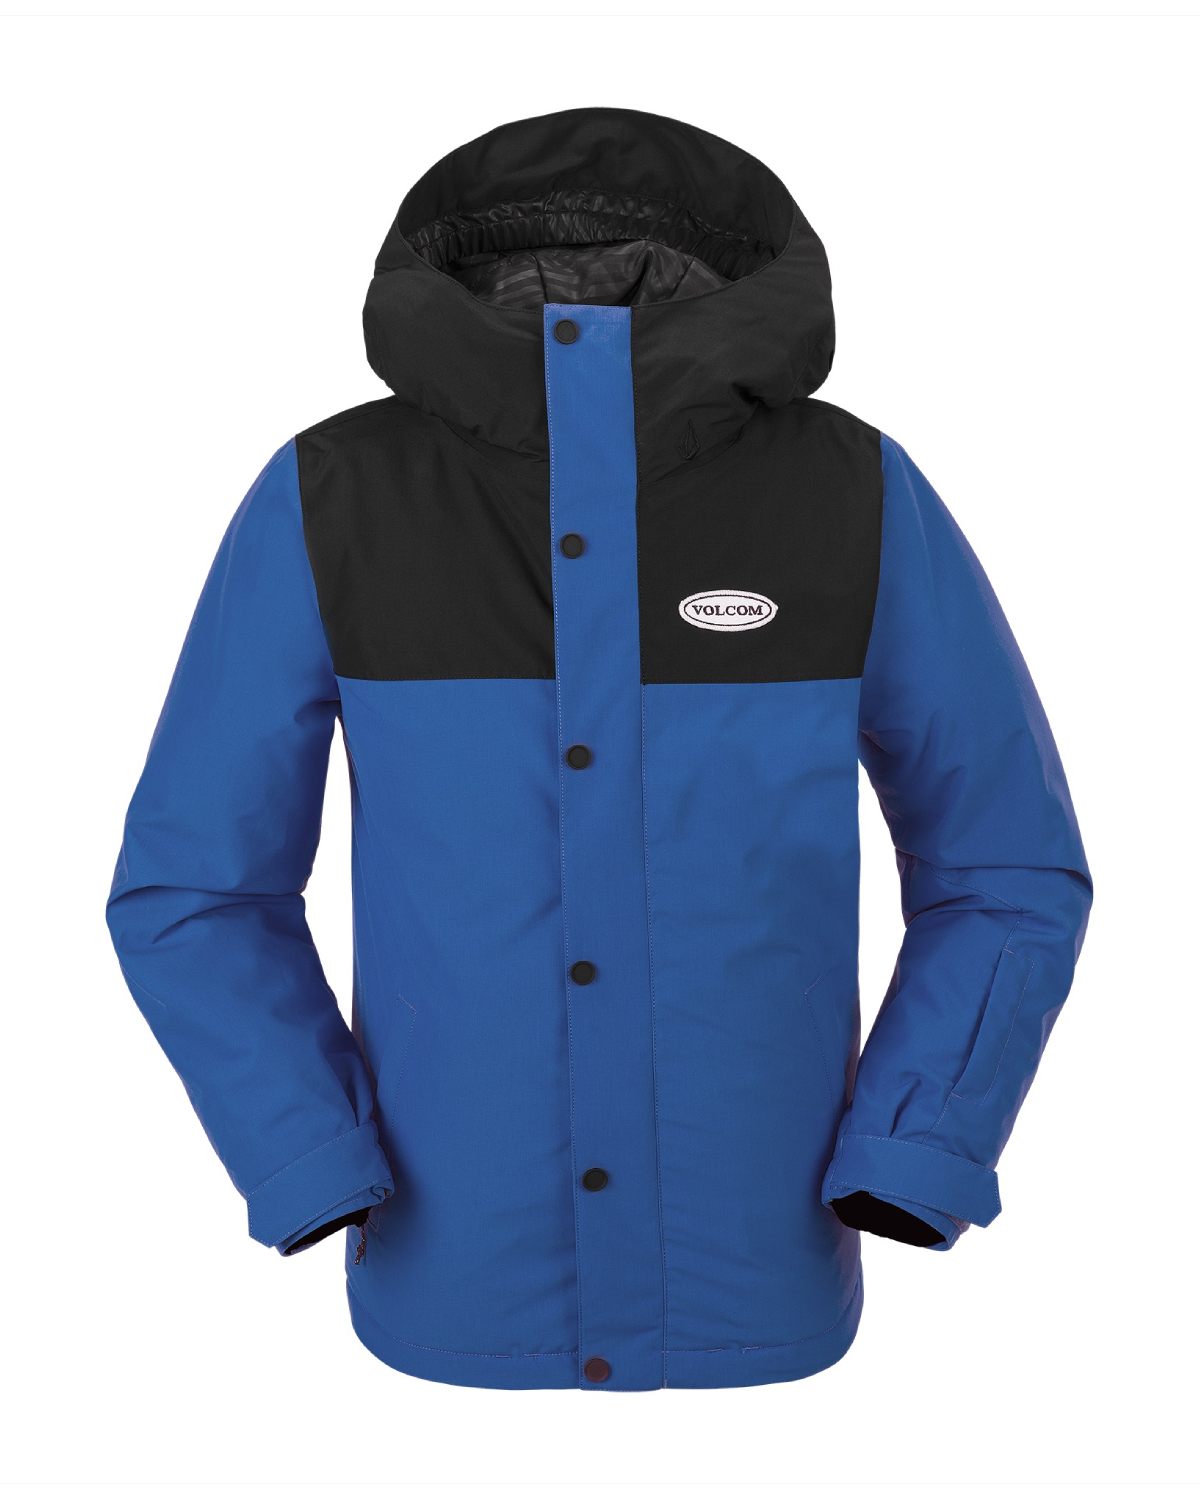 Volcom Kids Stone.91 Insulated Ski Jacket in Electric Blue (Ages 6 - 14)